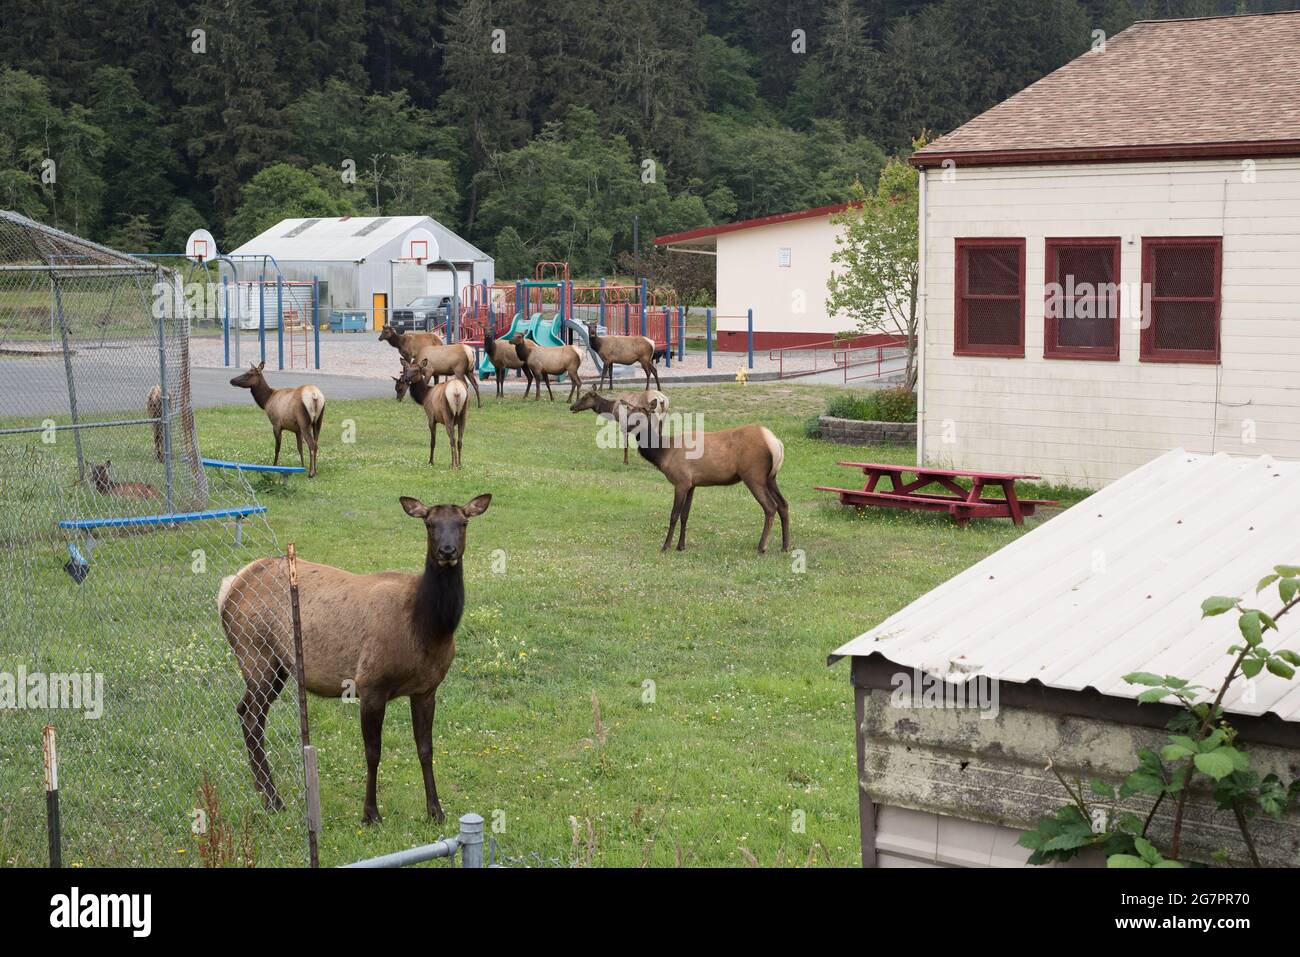 A herd of roosevelt elk (Cervus canadensis roosevelti) grazing around buildings in the town of Orick in Northern California. Stock Photo